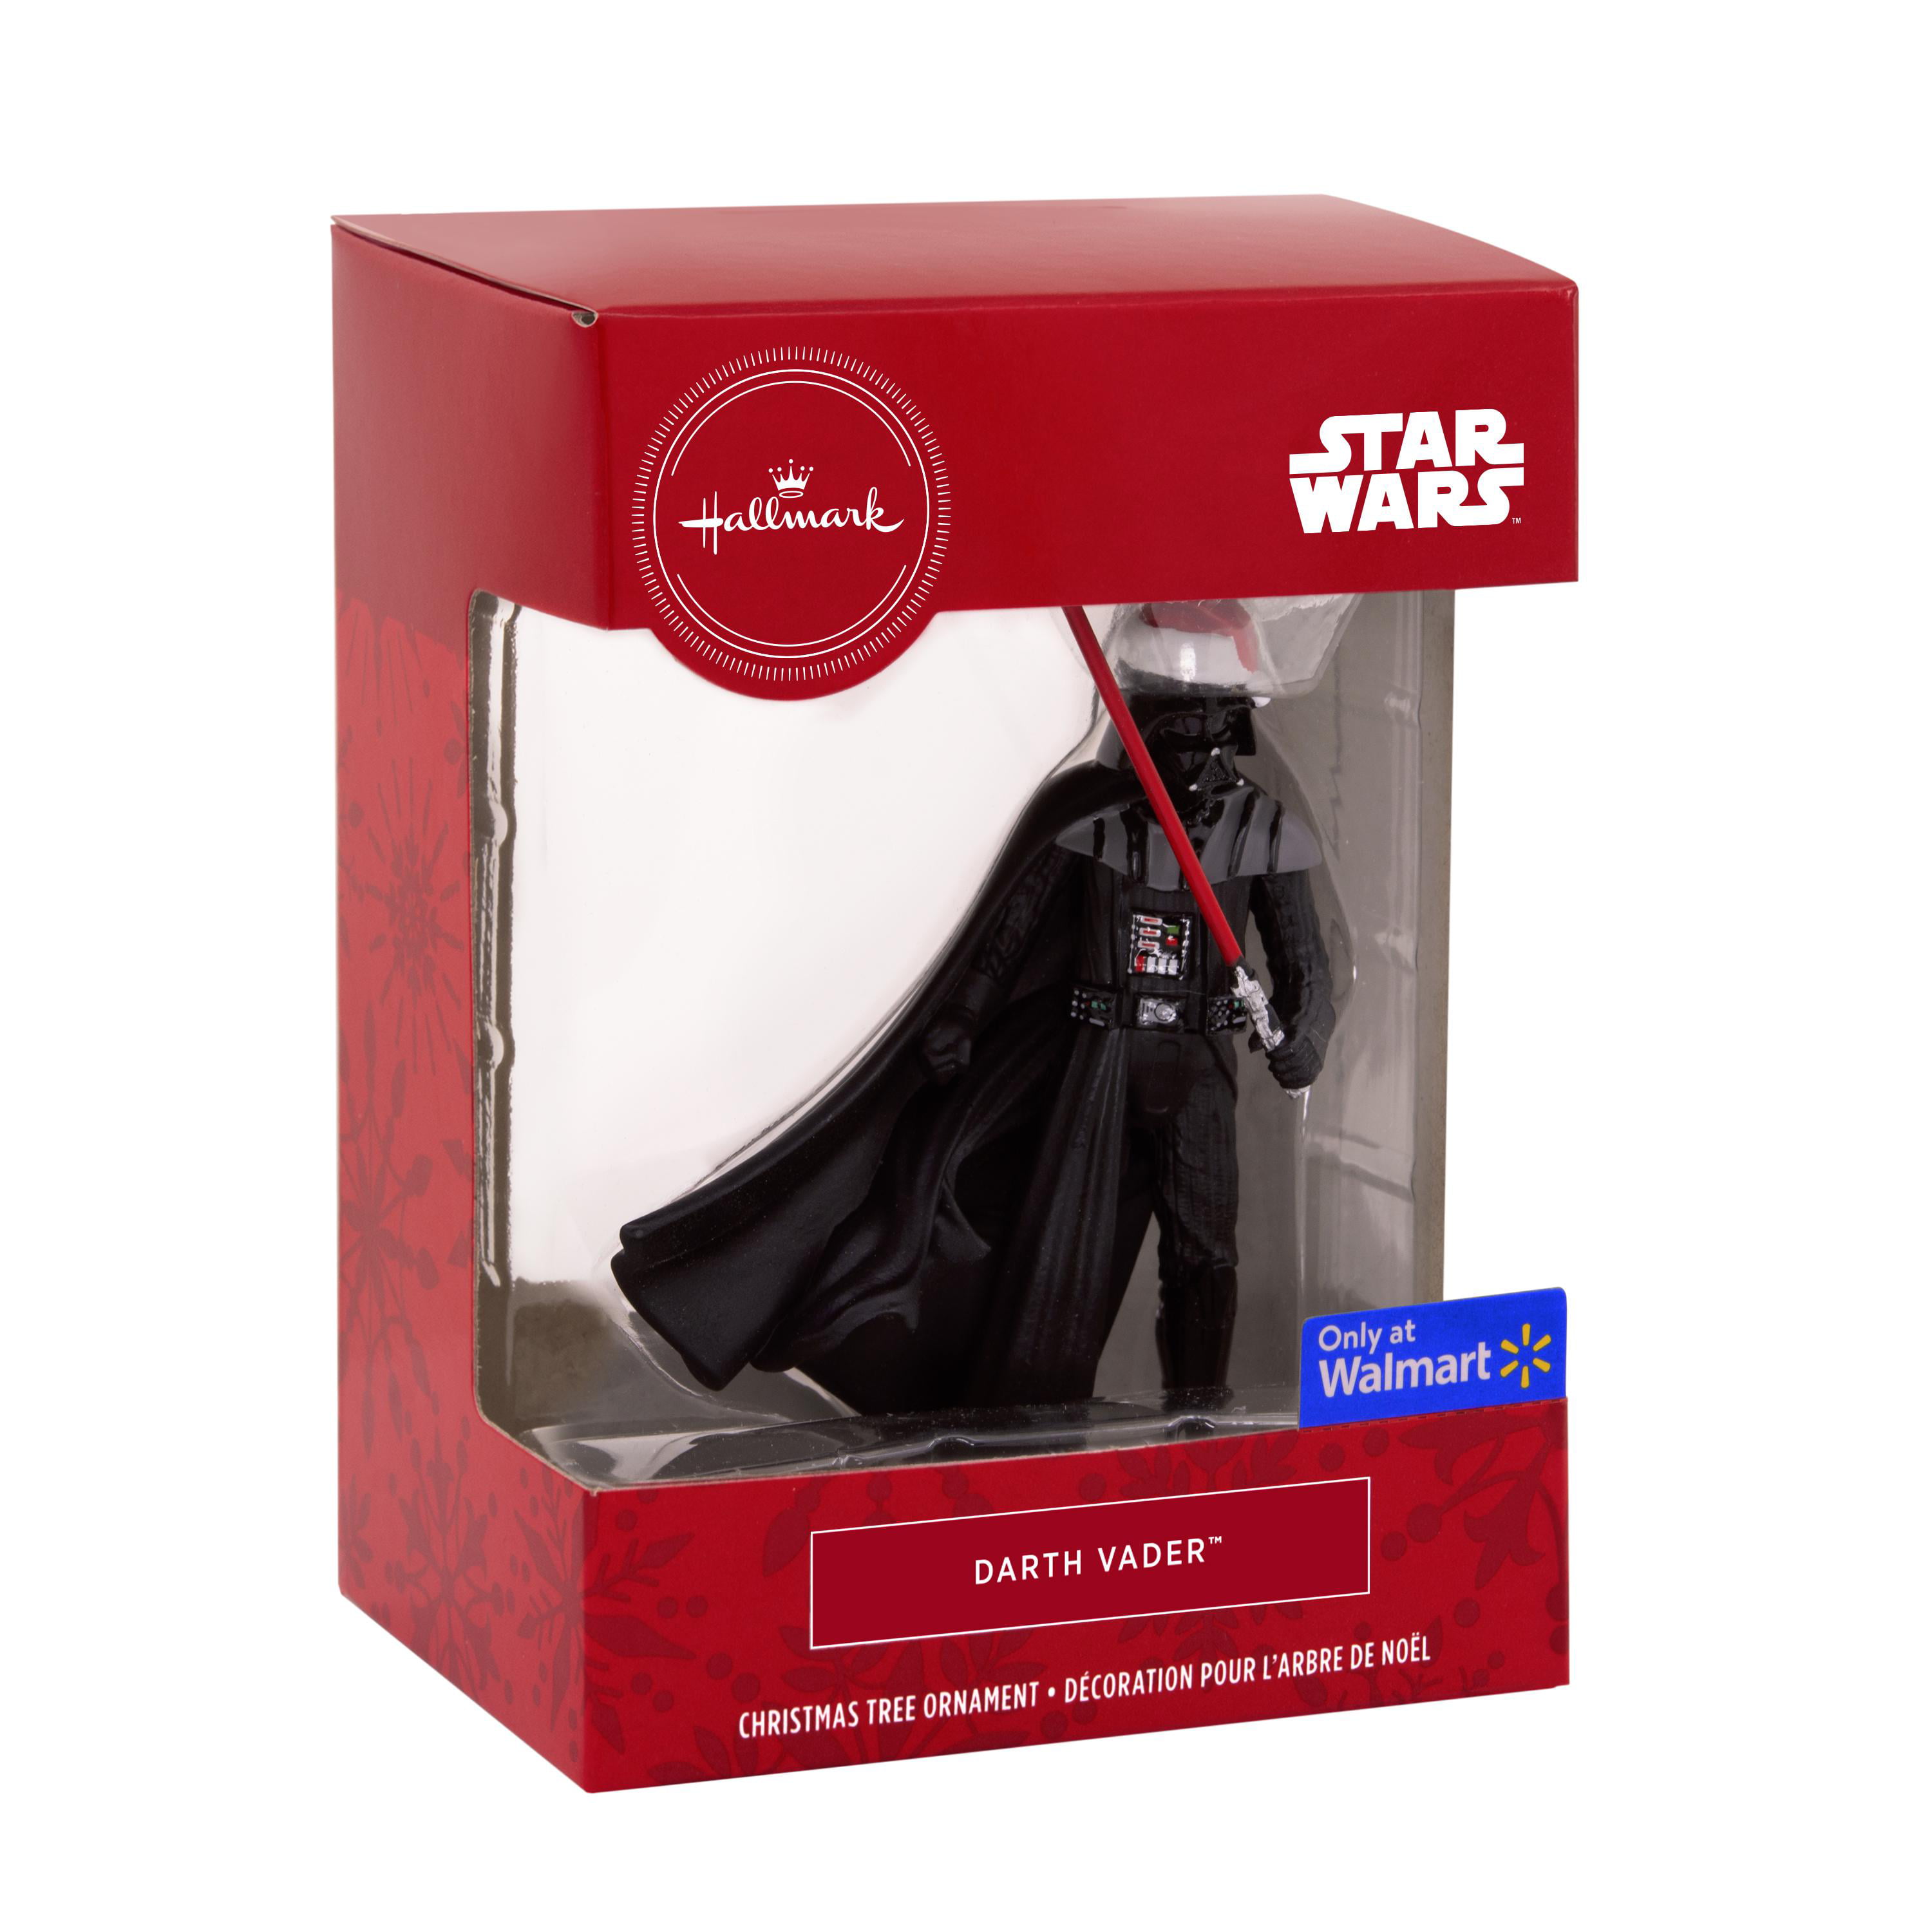 SOAP ON A ROPE **BRAND NEW SEALED IN BOX** STAR WARS DISNEY DARTH VADER